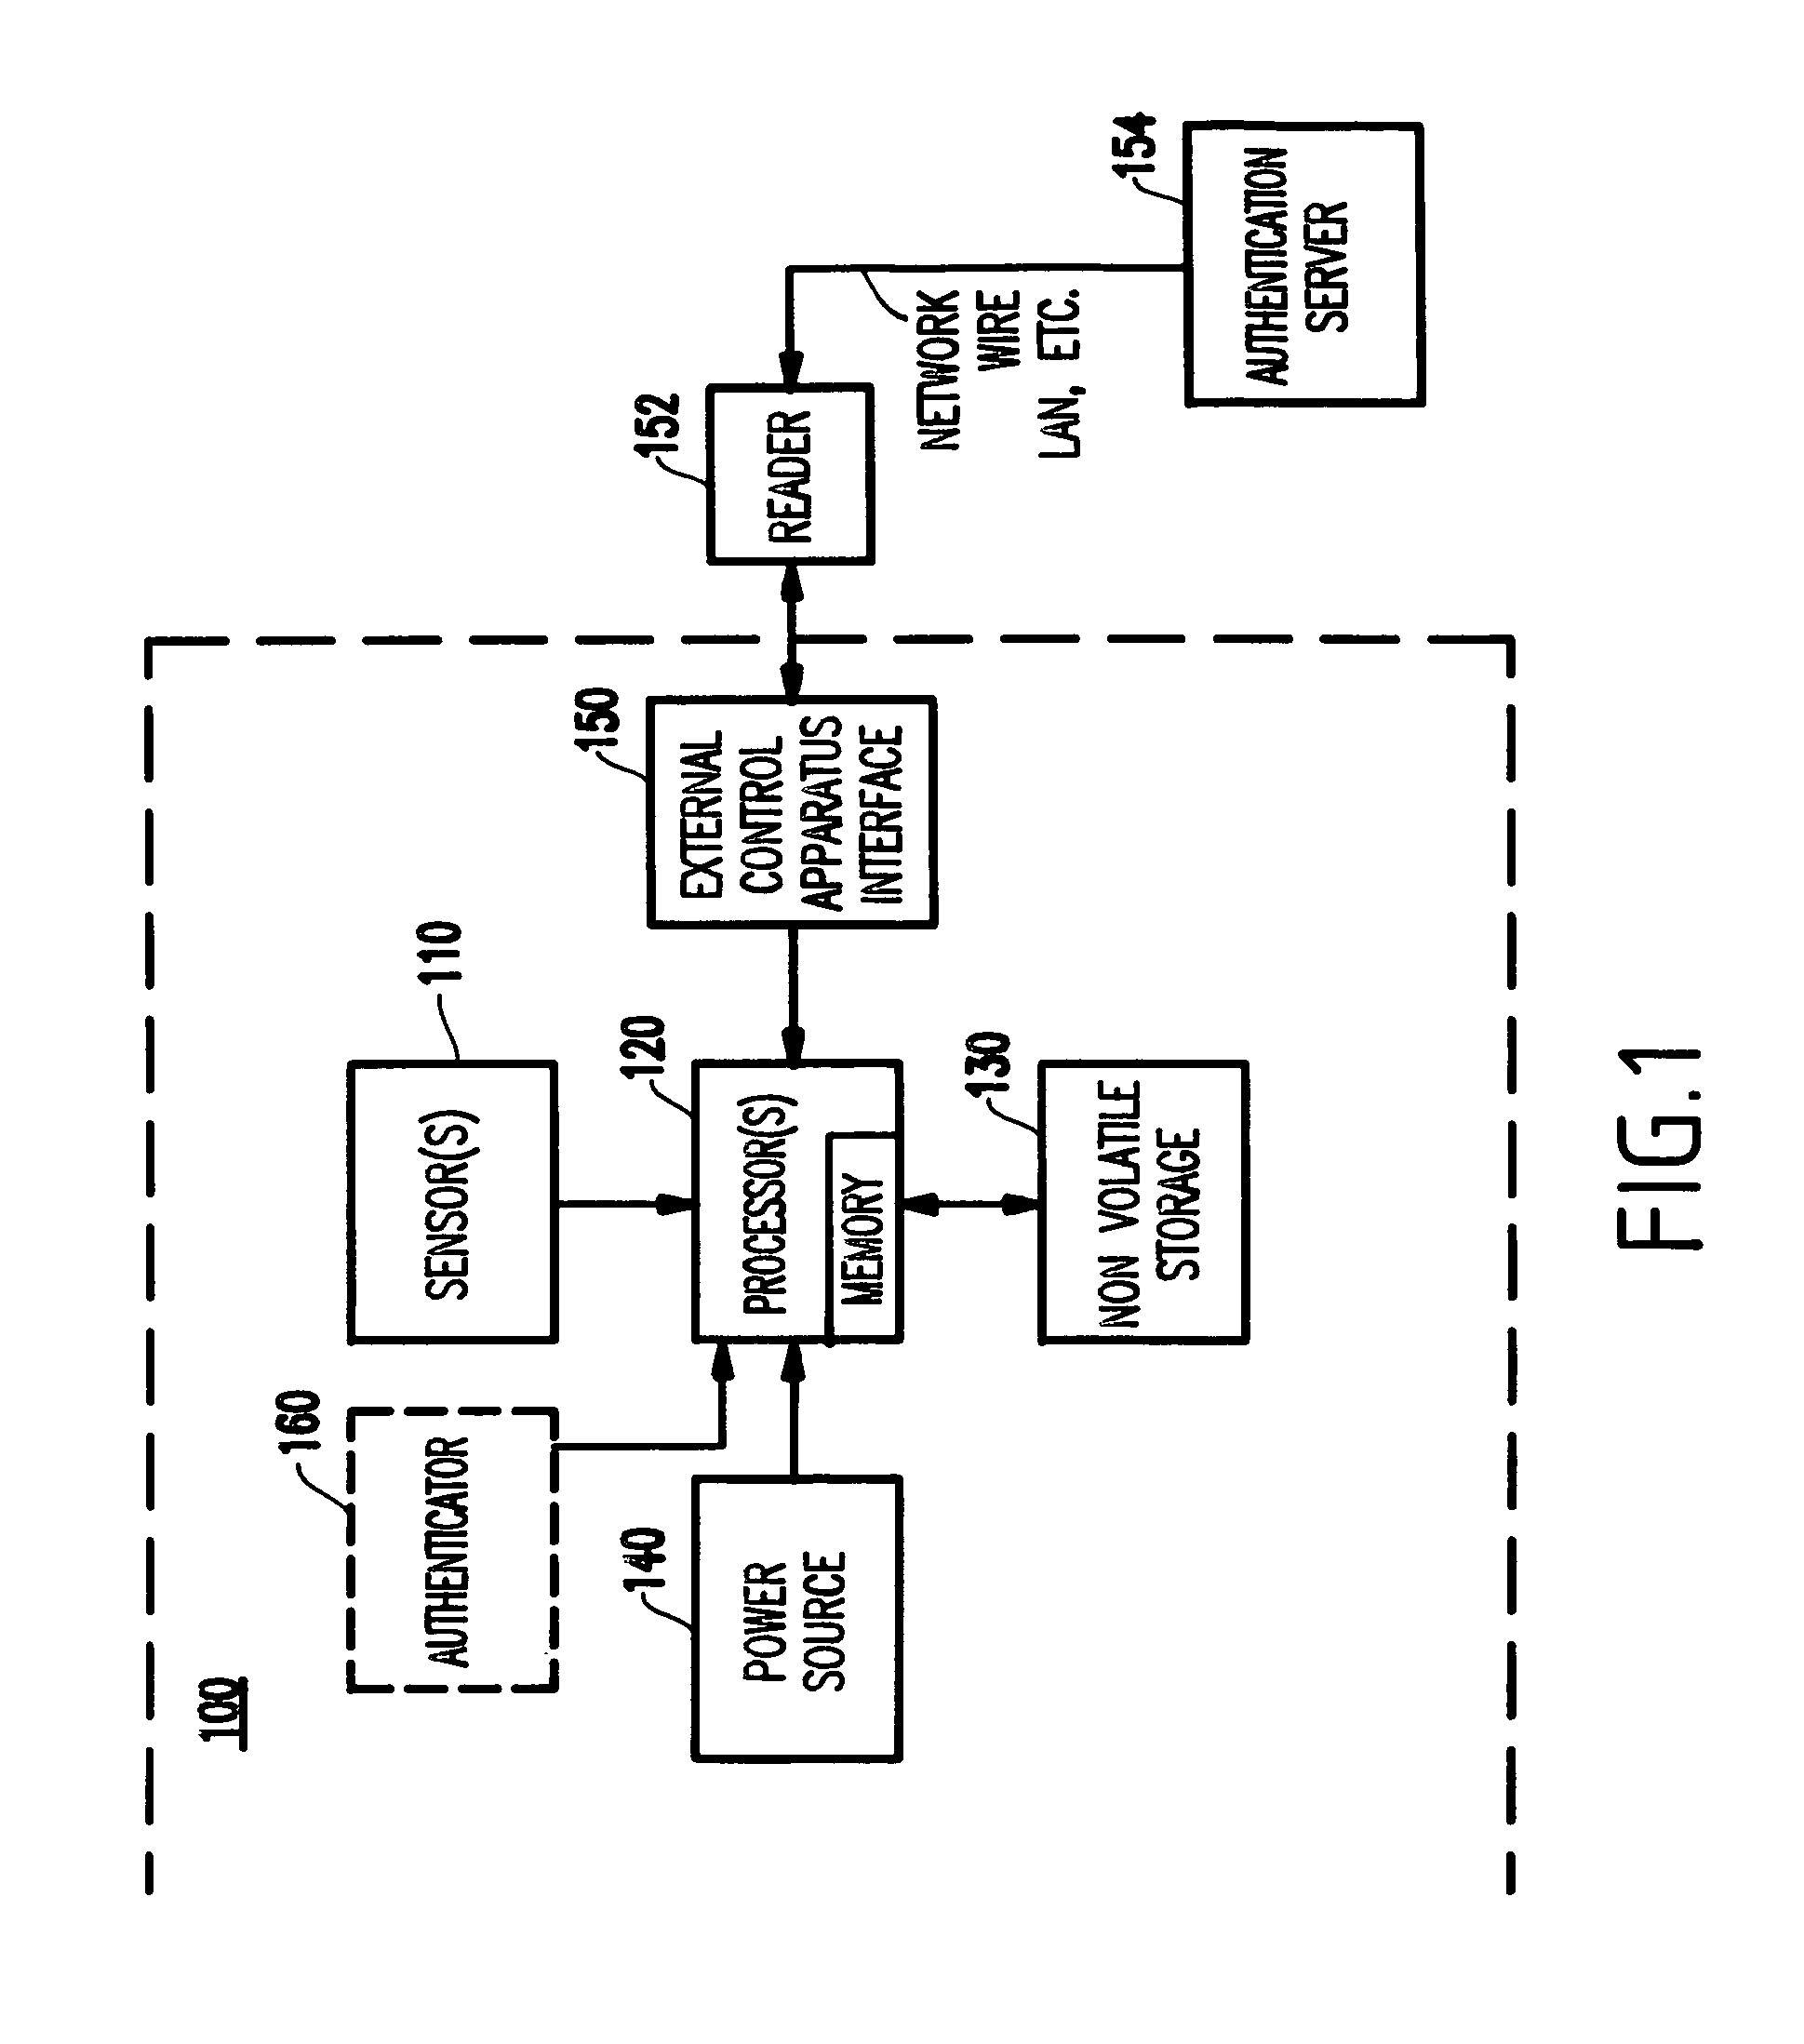 Method and apparatus for secure authorization and identification using biometrics without privacy invasion